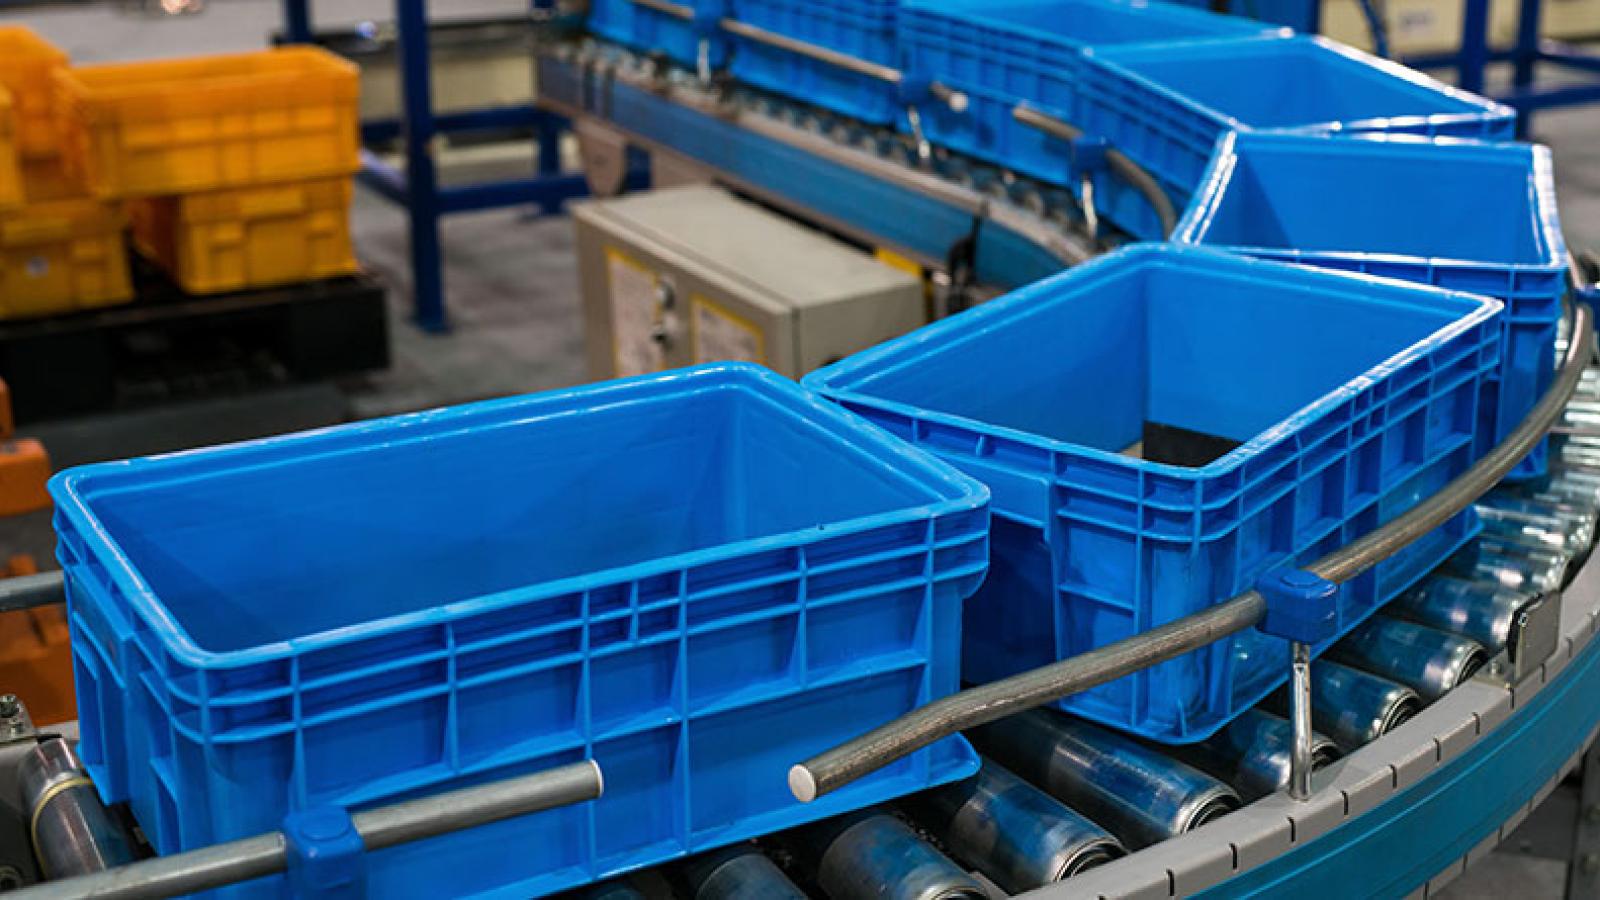 Returnable transport items tote boxes on conveyor